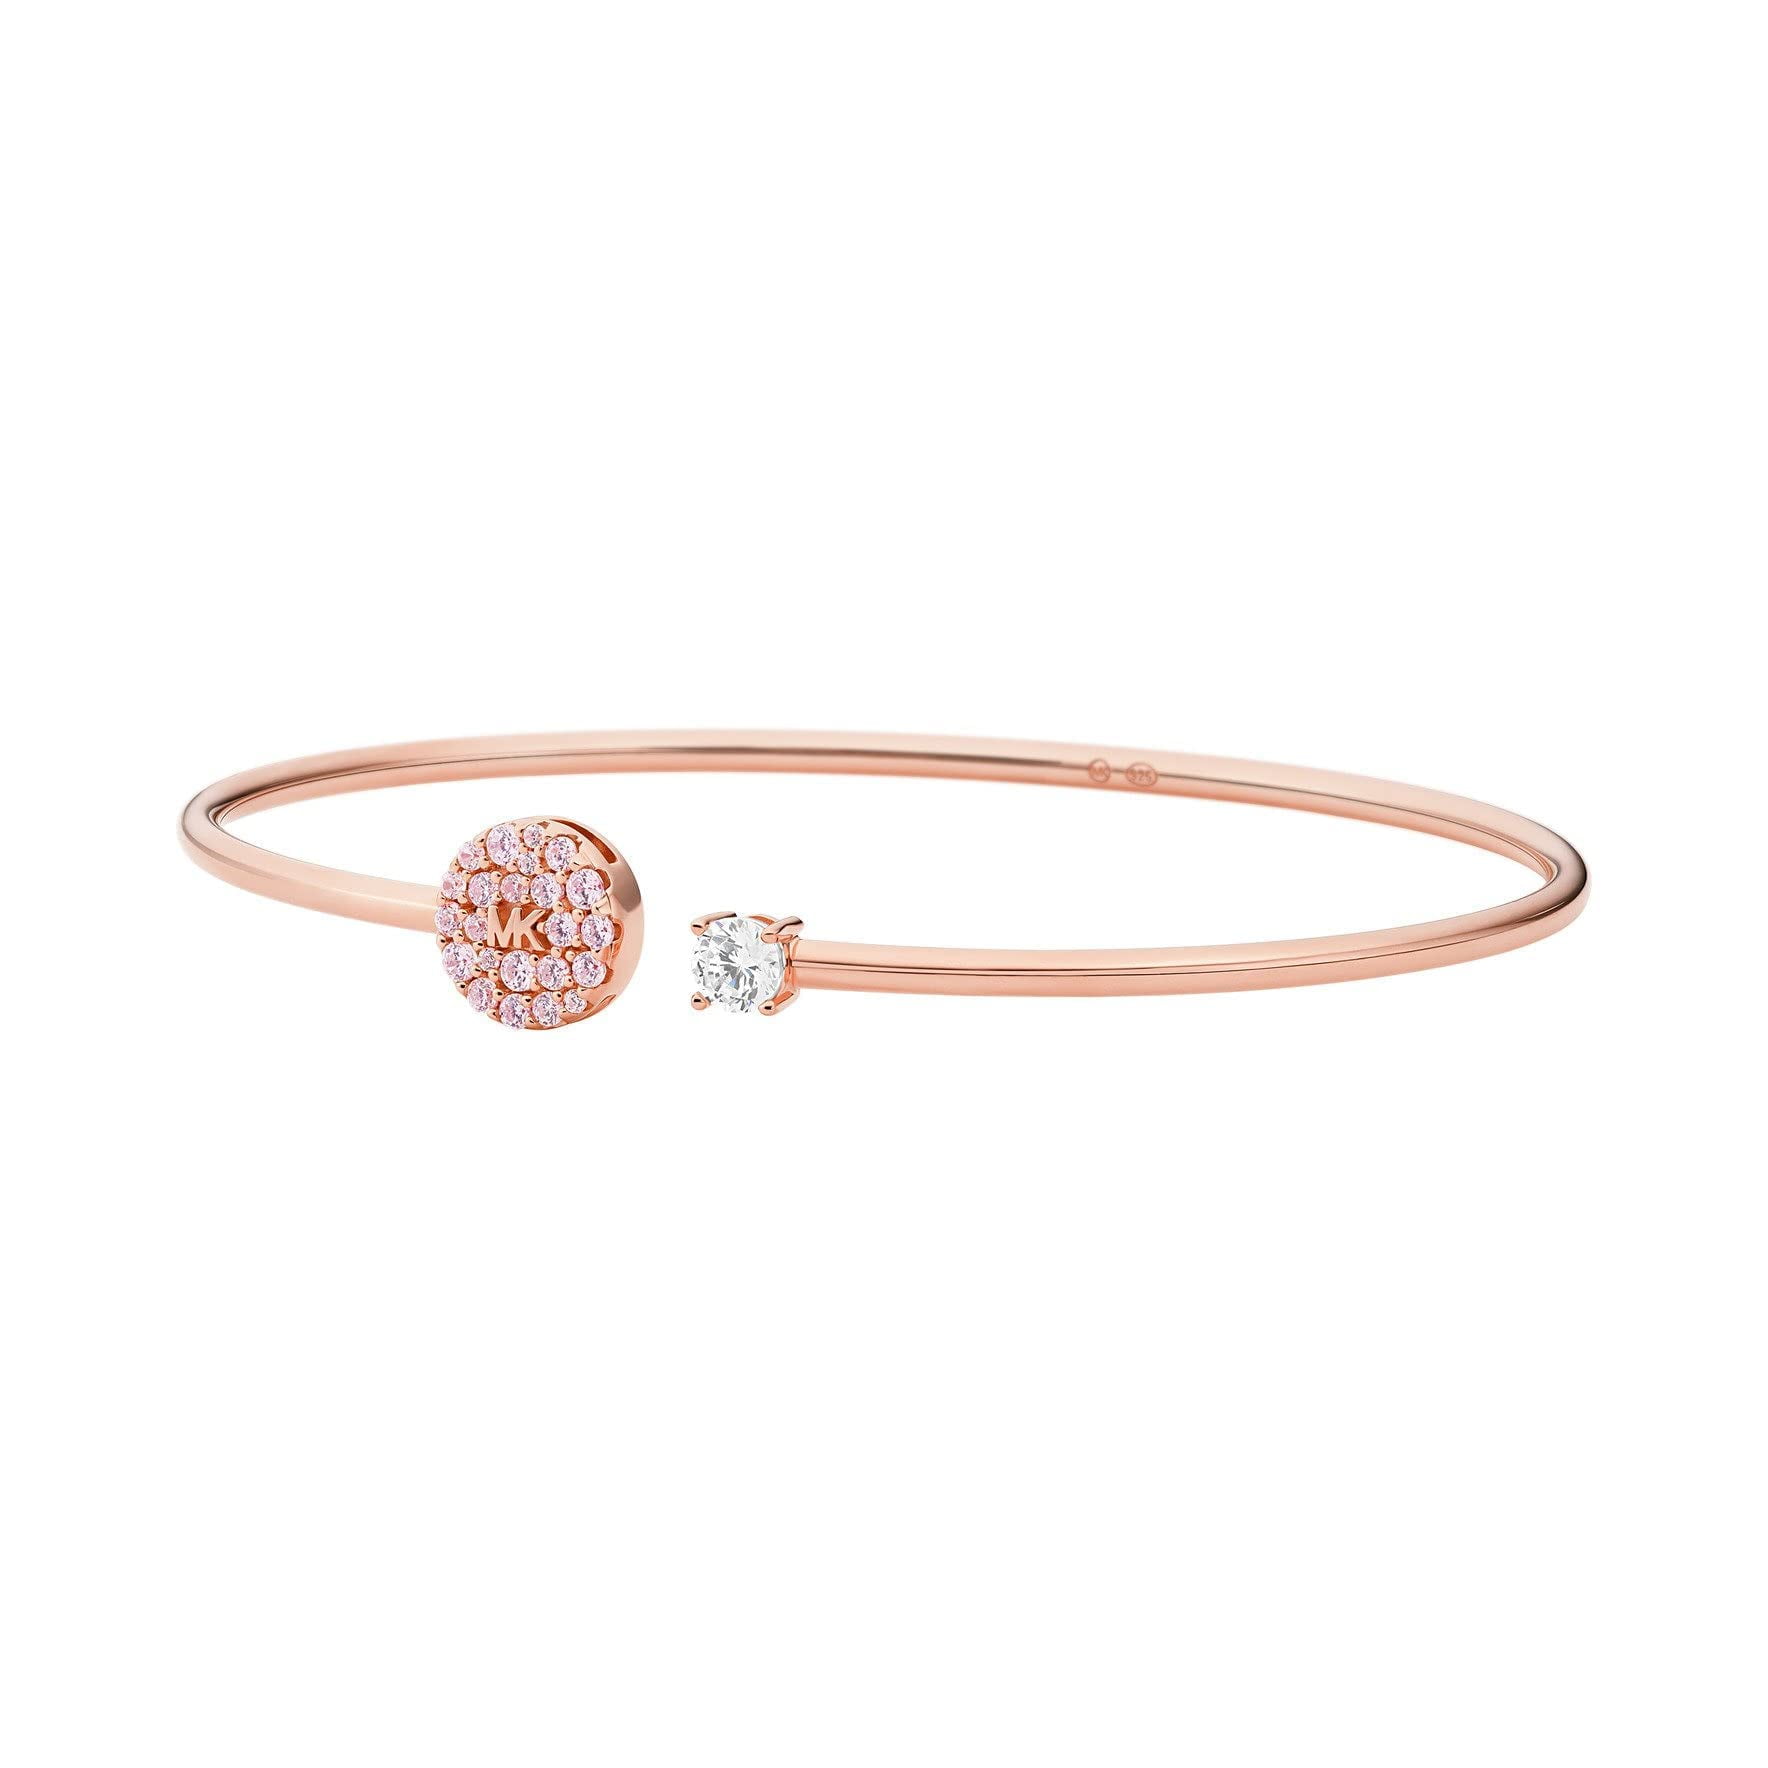 Michael Kors Sterling Silver Pave Disk Open Cuff Bracelet Rose Gold Tone  One Size | Walmart Canada